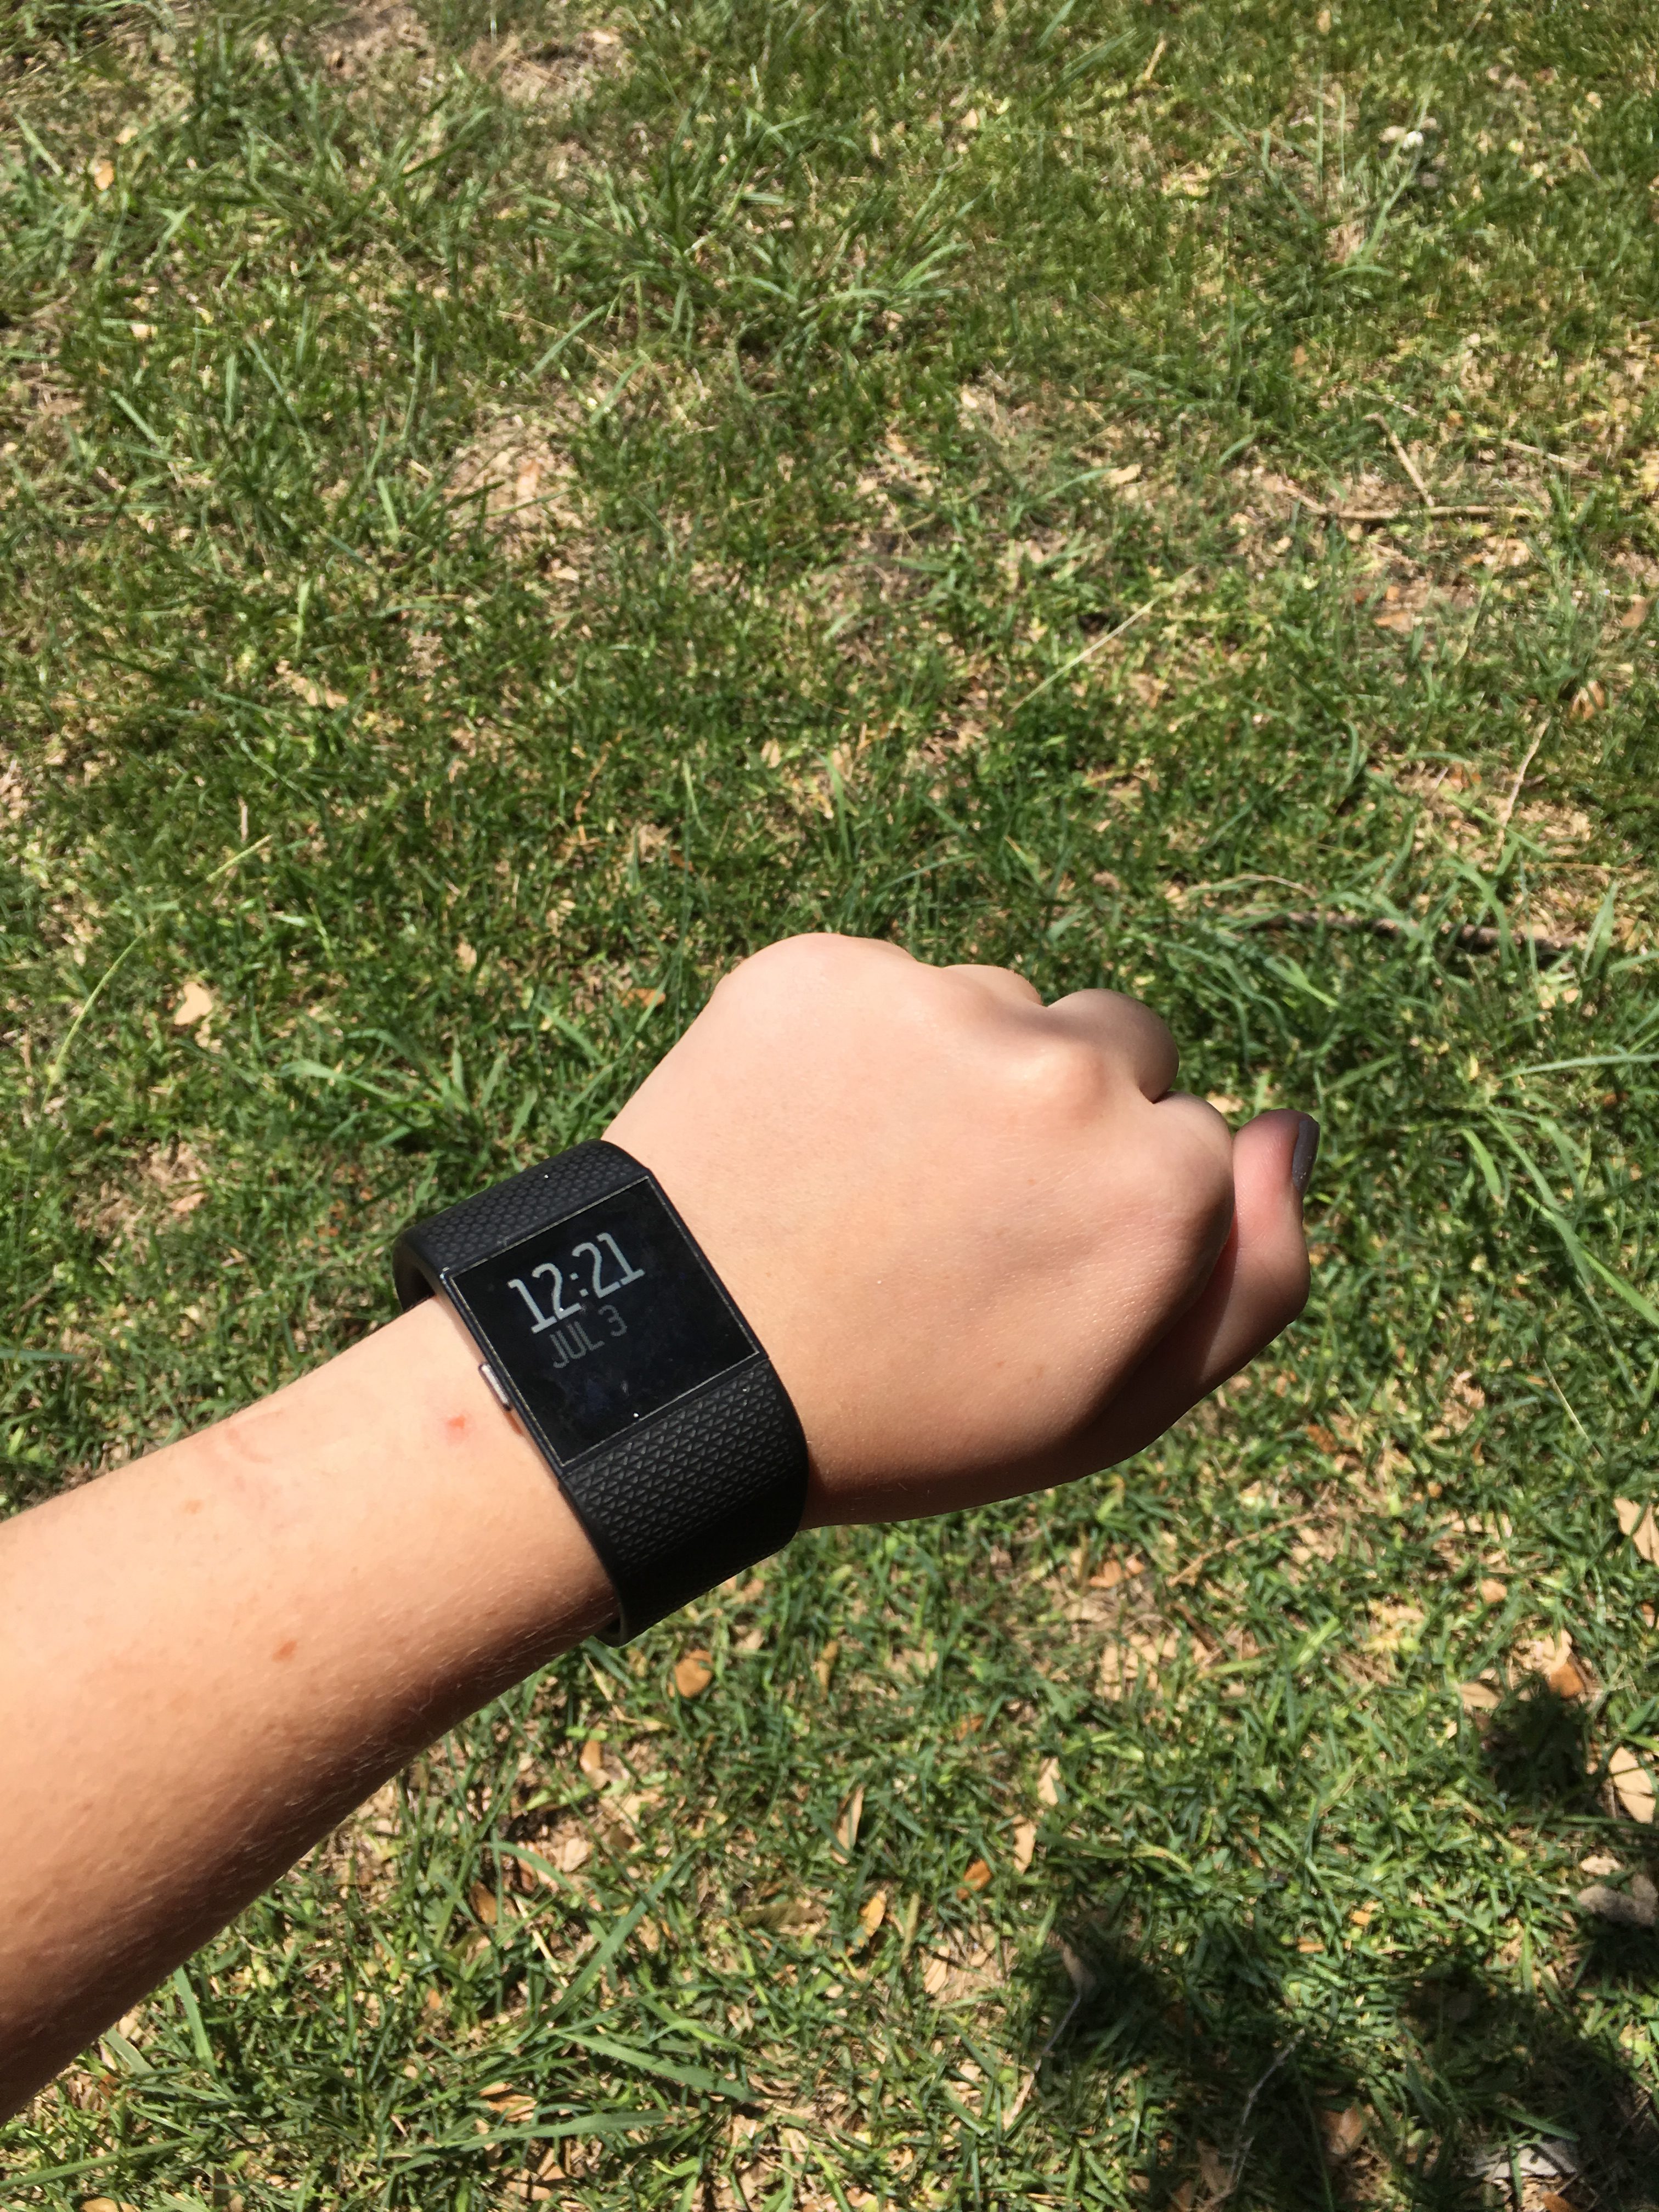 Is a Fitbit worth it How it changed my life in one month